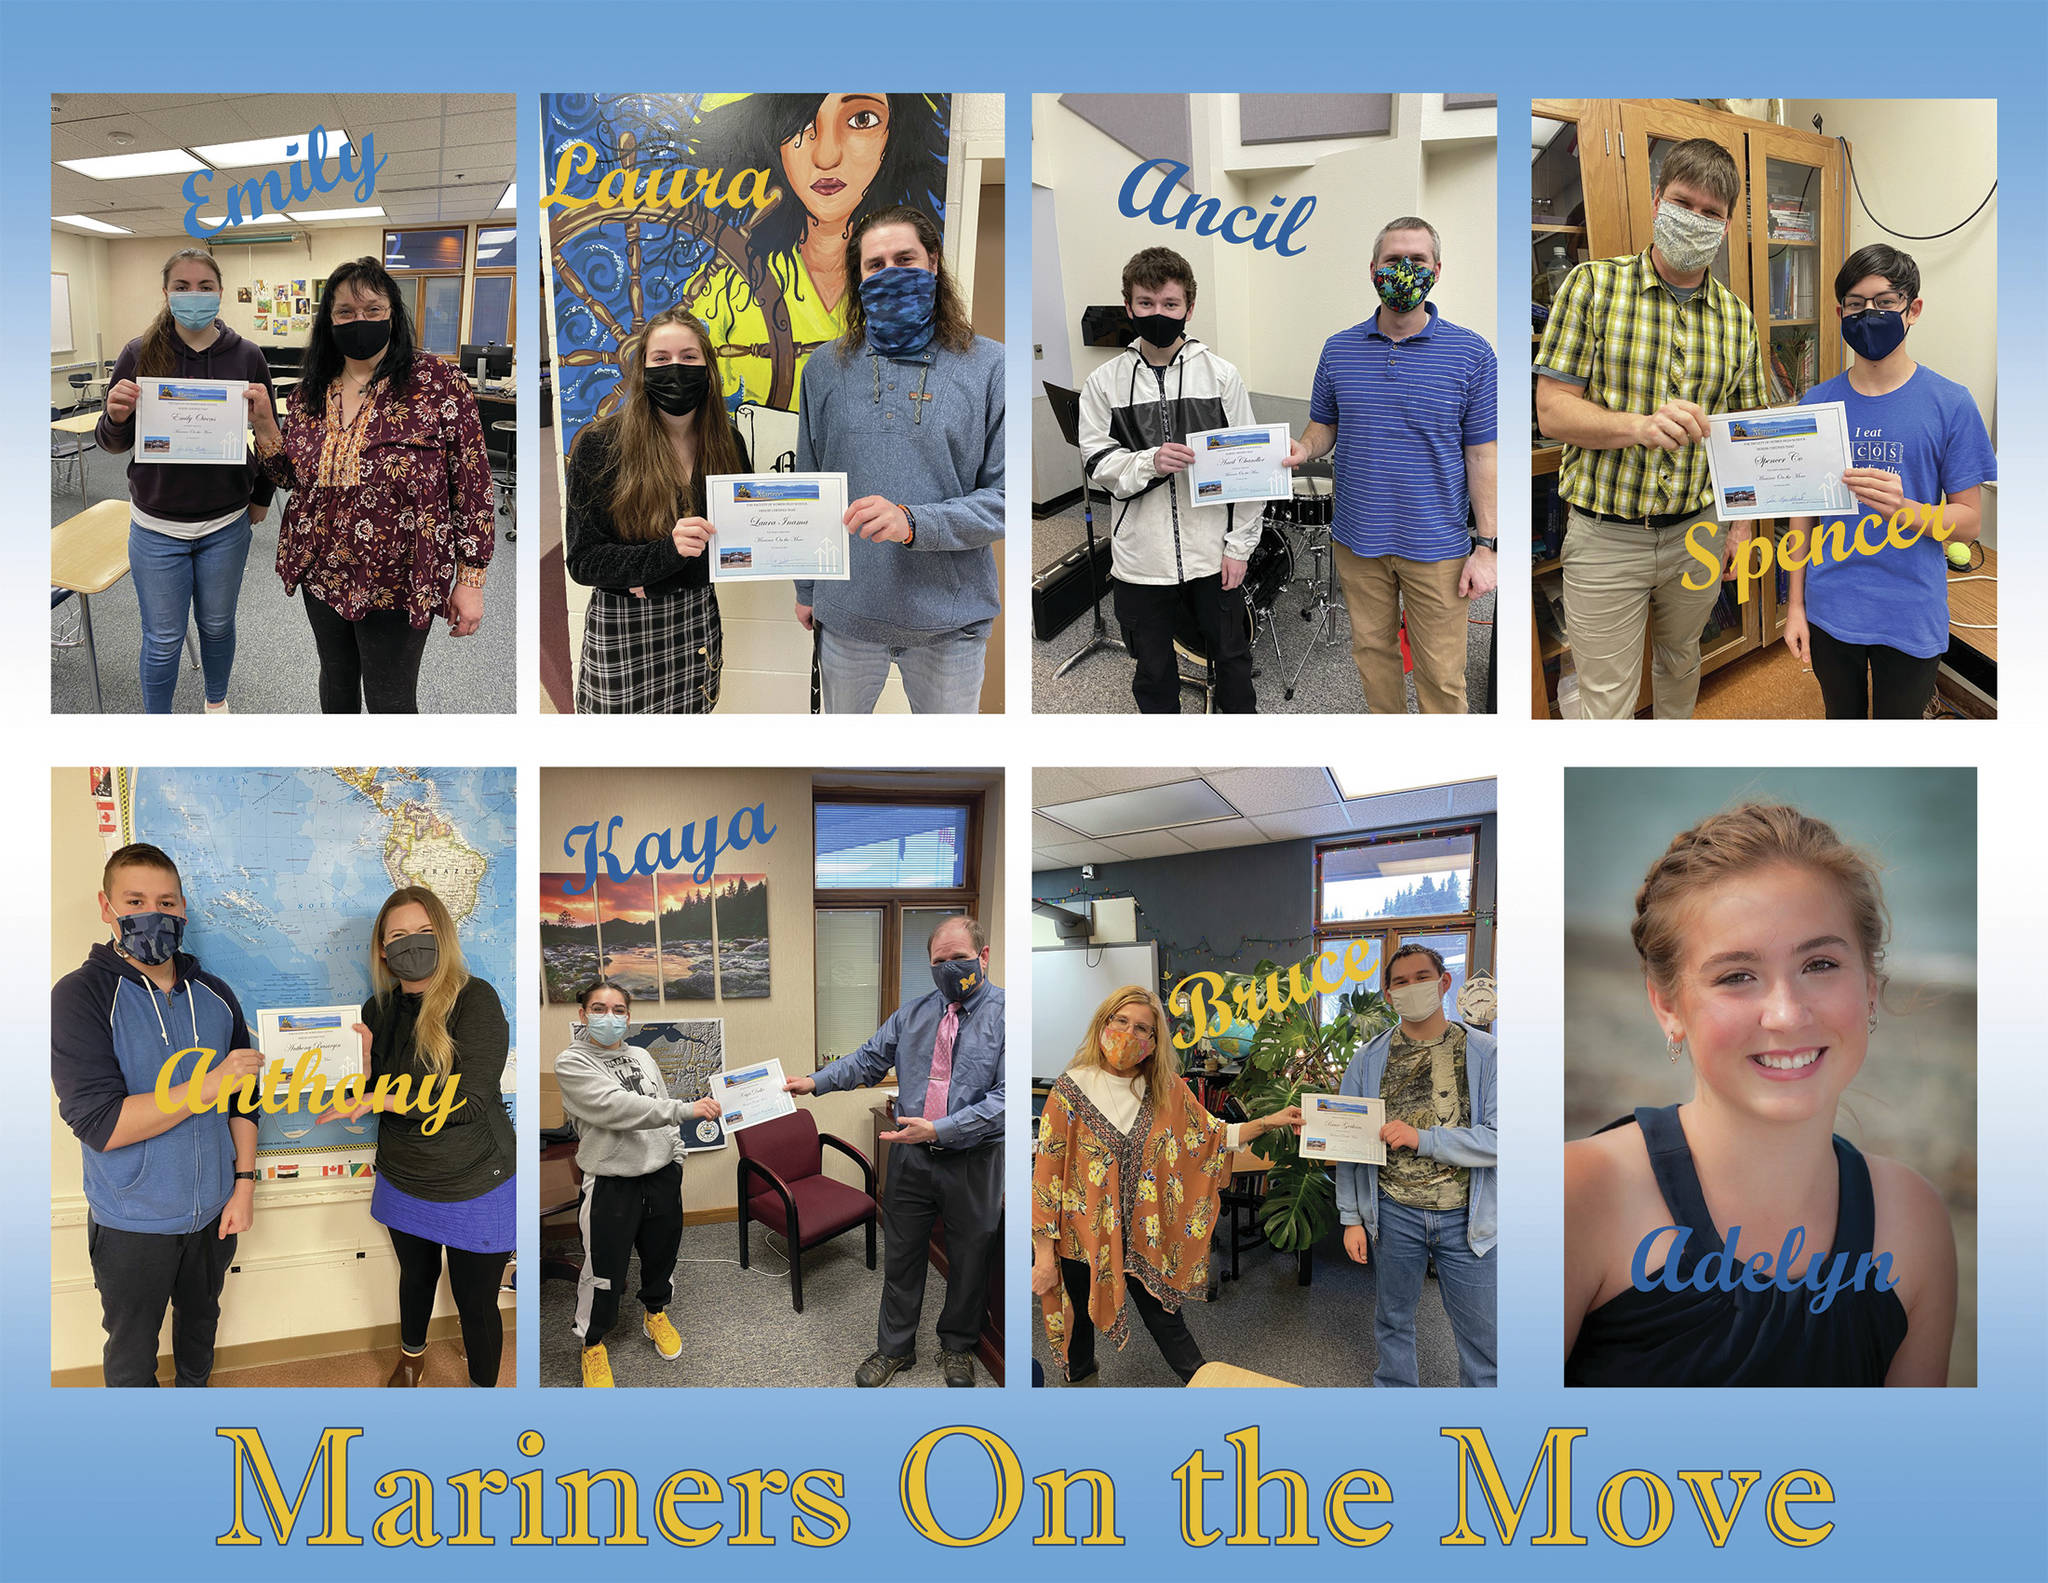 This image compilation shows the latest winners of the Mariners on the Move award from Homer High School. (Image courtesy Paul Story)